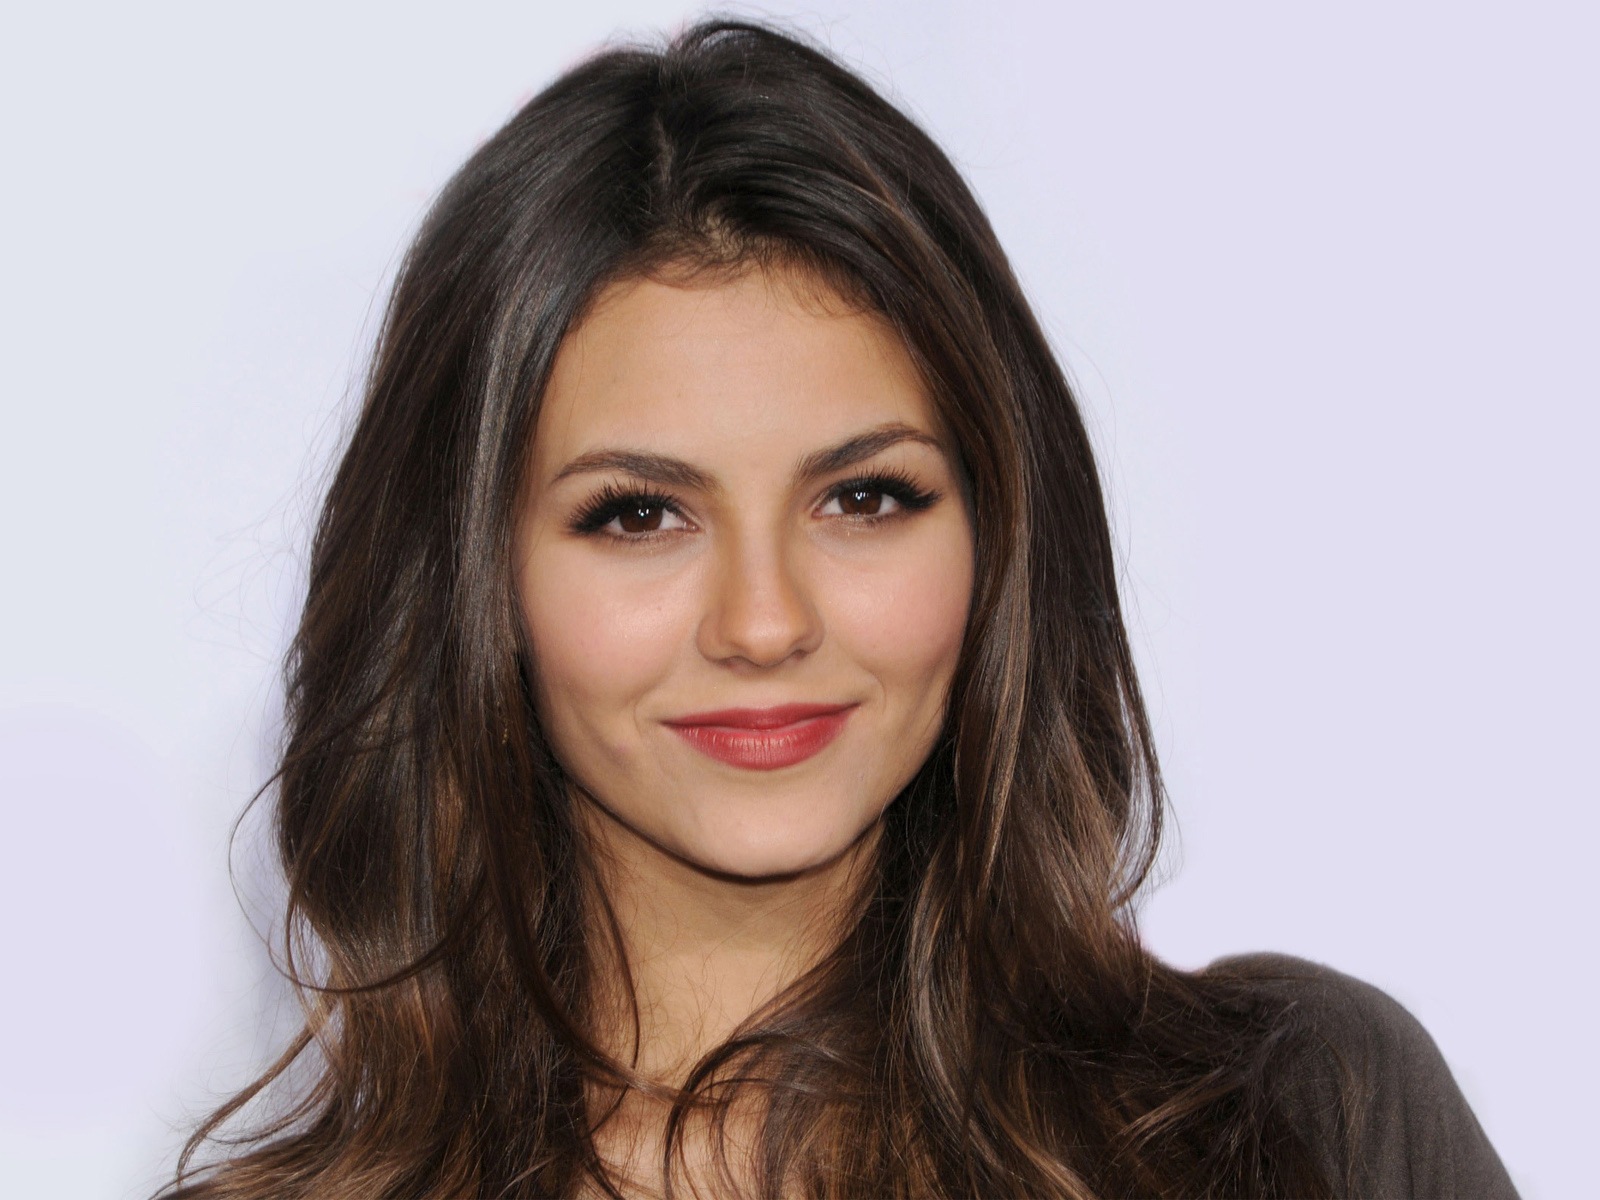 Victoria Justice beautiful wallpapers #26 - 1600x1200